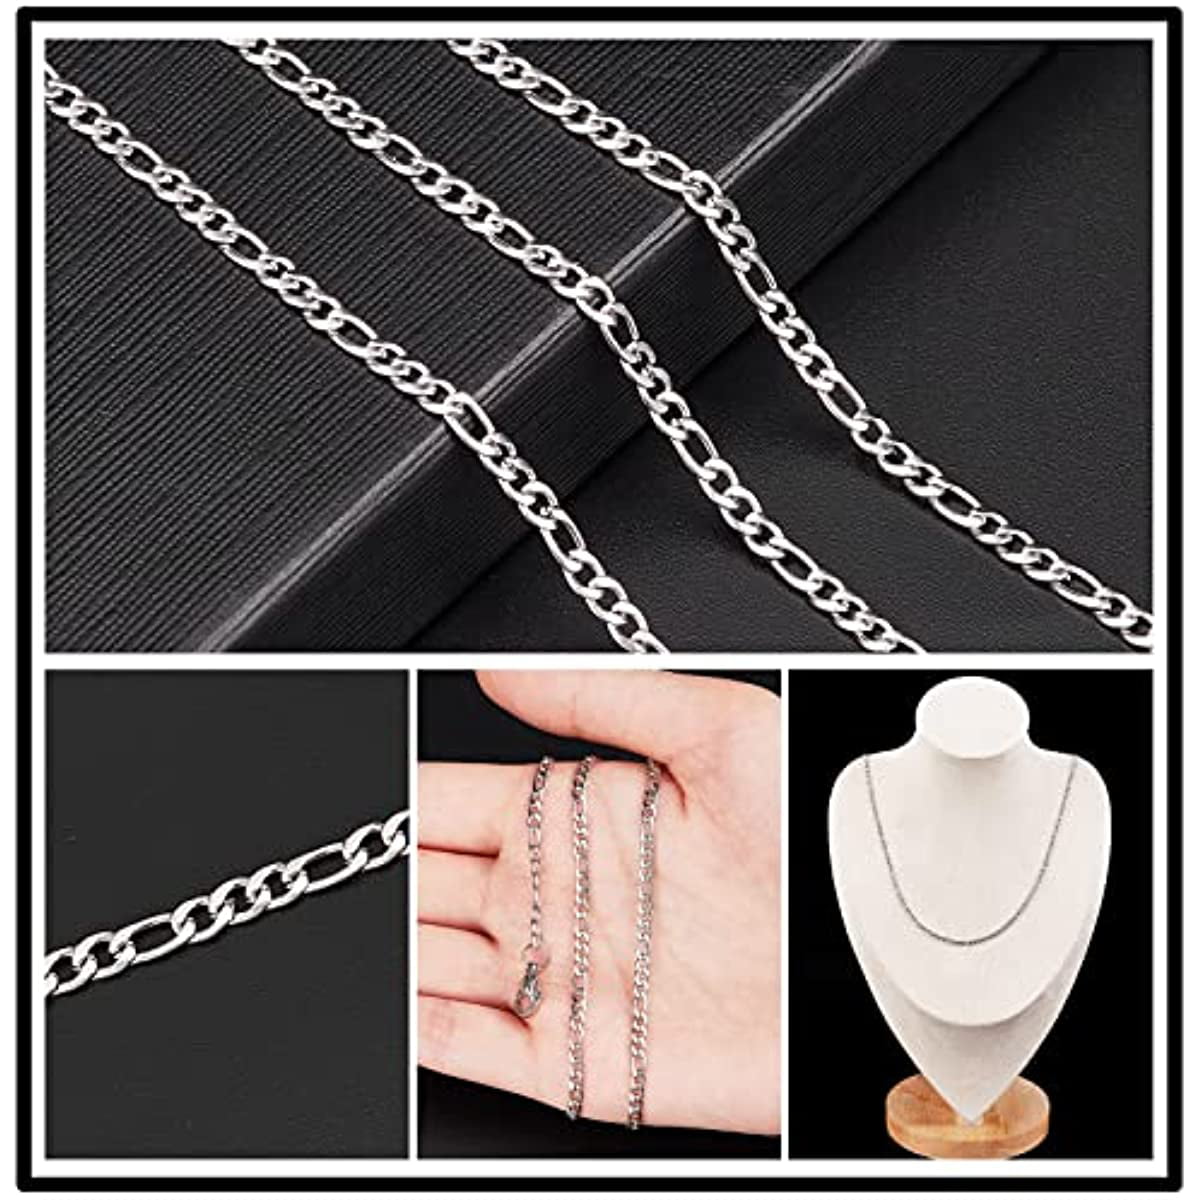 DIY 10M 32.8 Feet 3MM Silver Chain Roll Figaro Chains Silver Plated Necklace  Stainless Steel Cable Long Craft Link Chain Bulk for Jewelry Making Kits  Necklaces Bracelets Crafting Supplies 